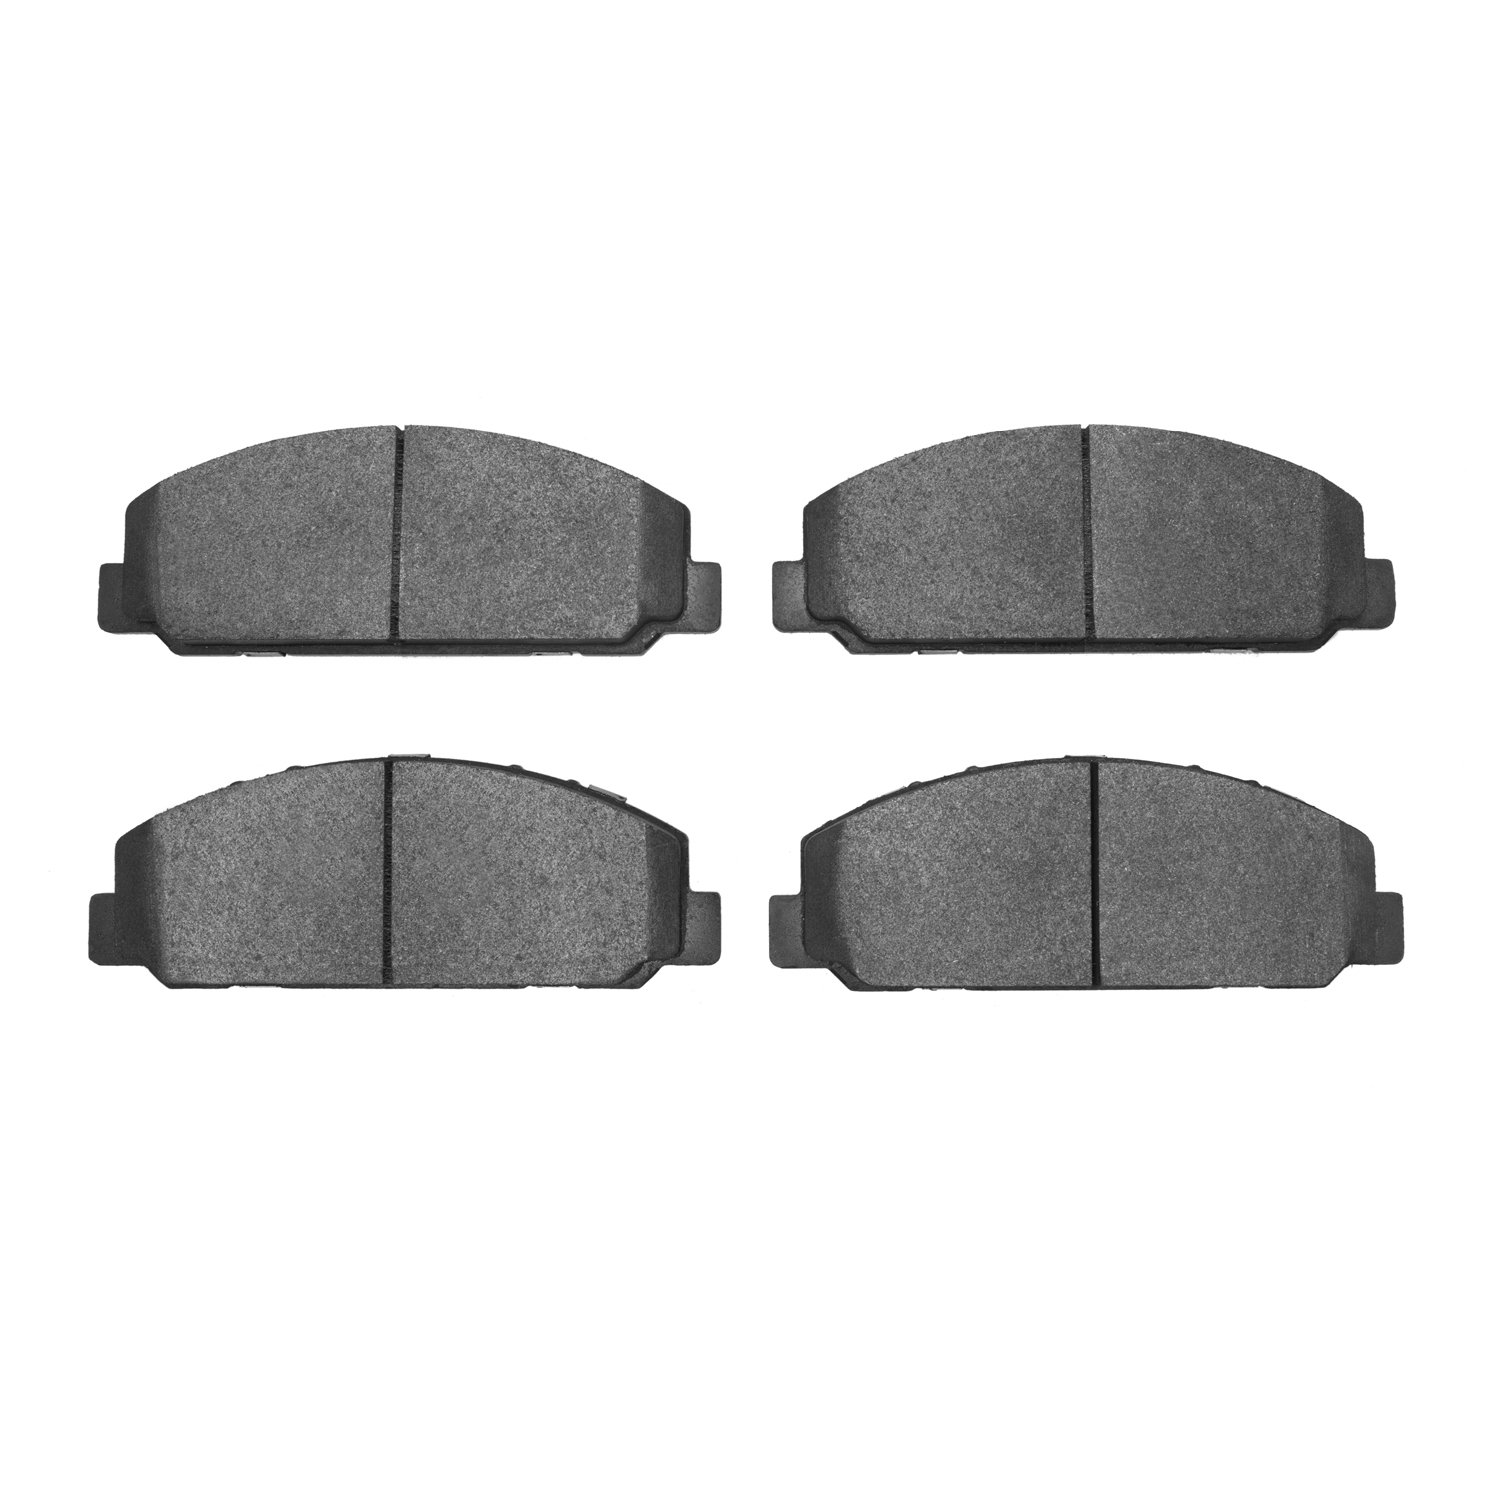 Super-Duty Brake Pads, Fits Select GM, Position: Front